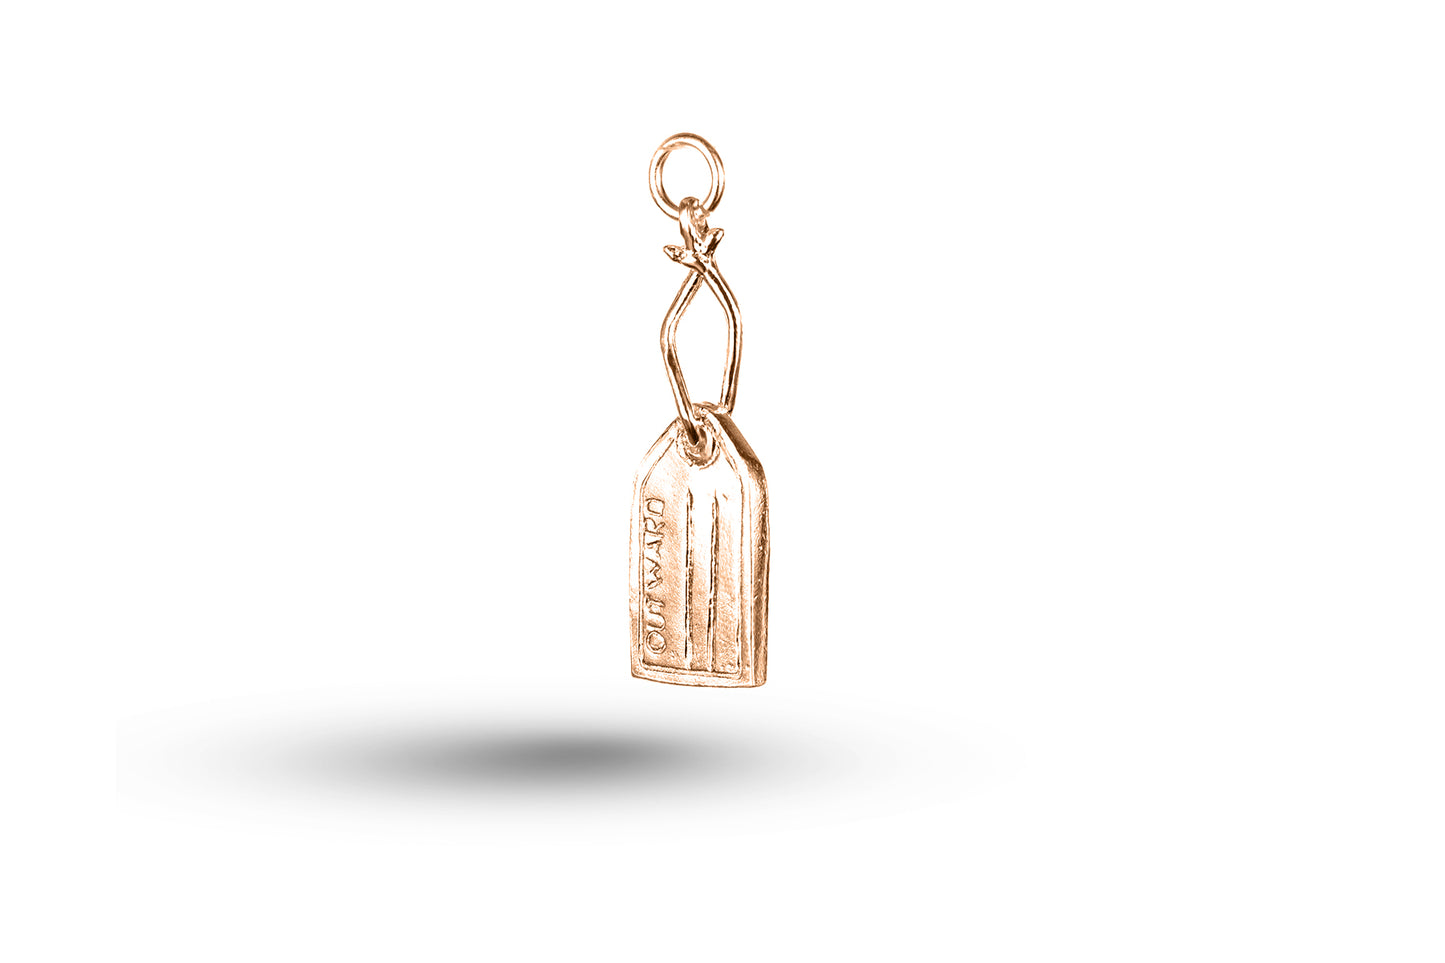 Rose gold Luggage Label charm.